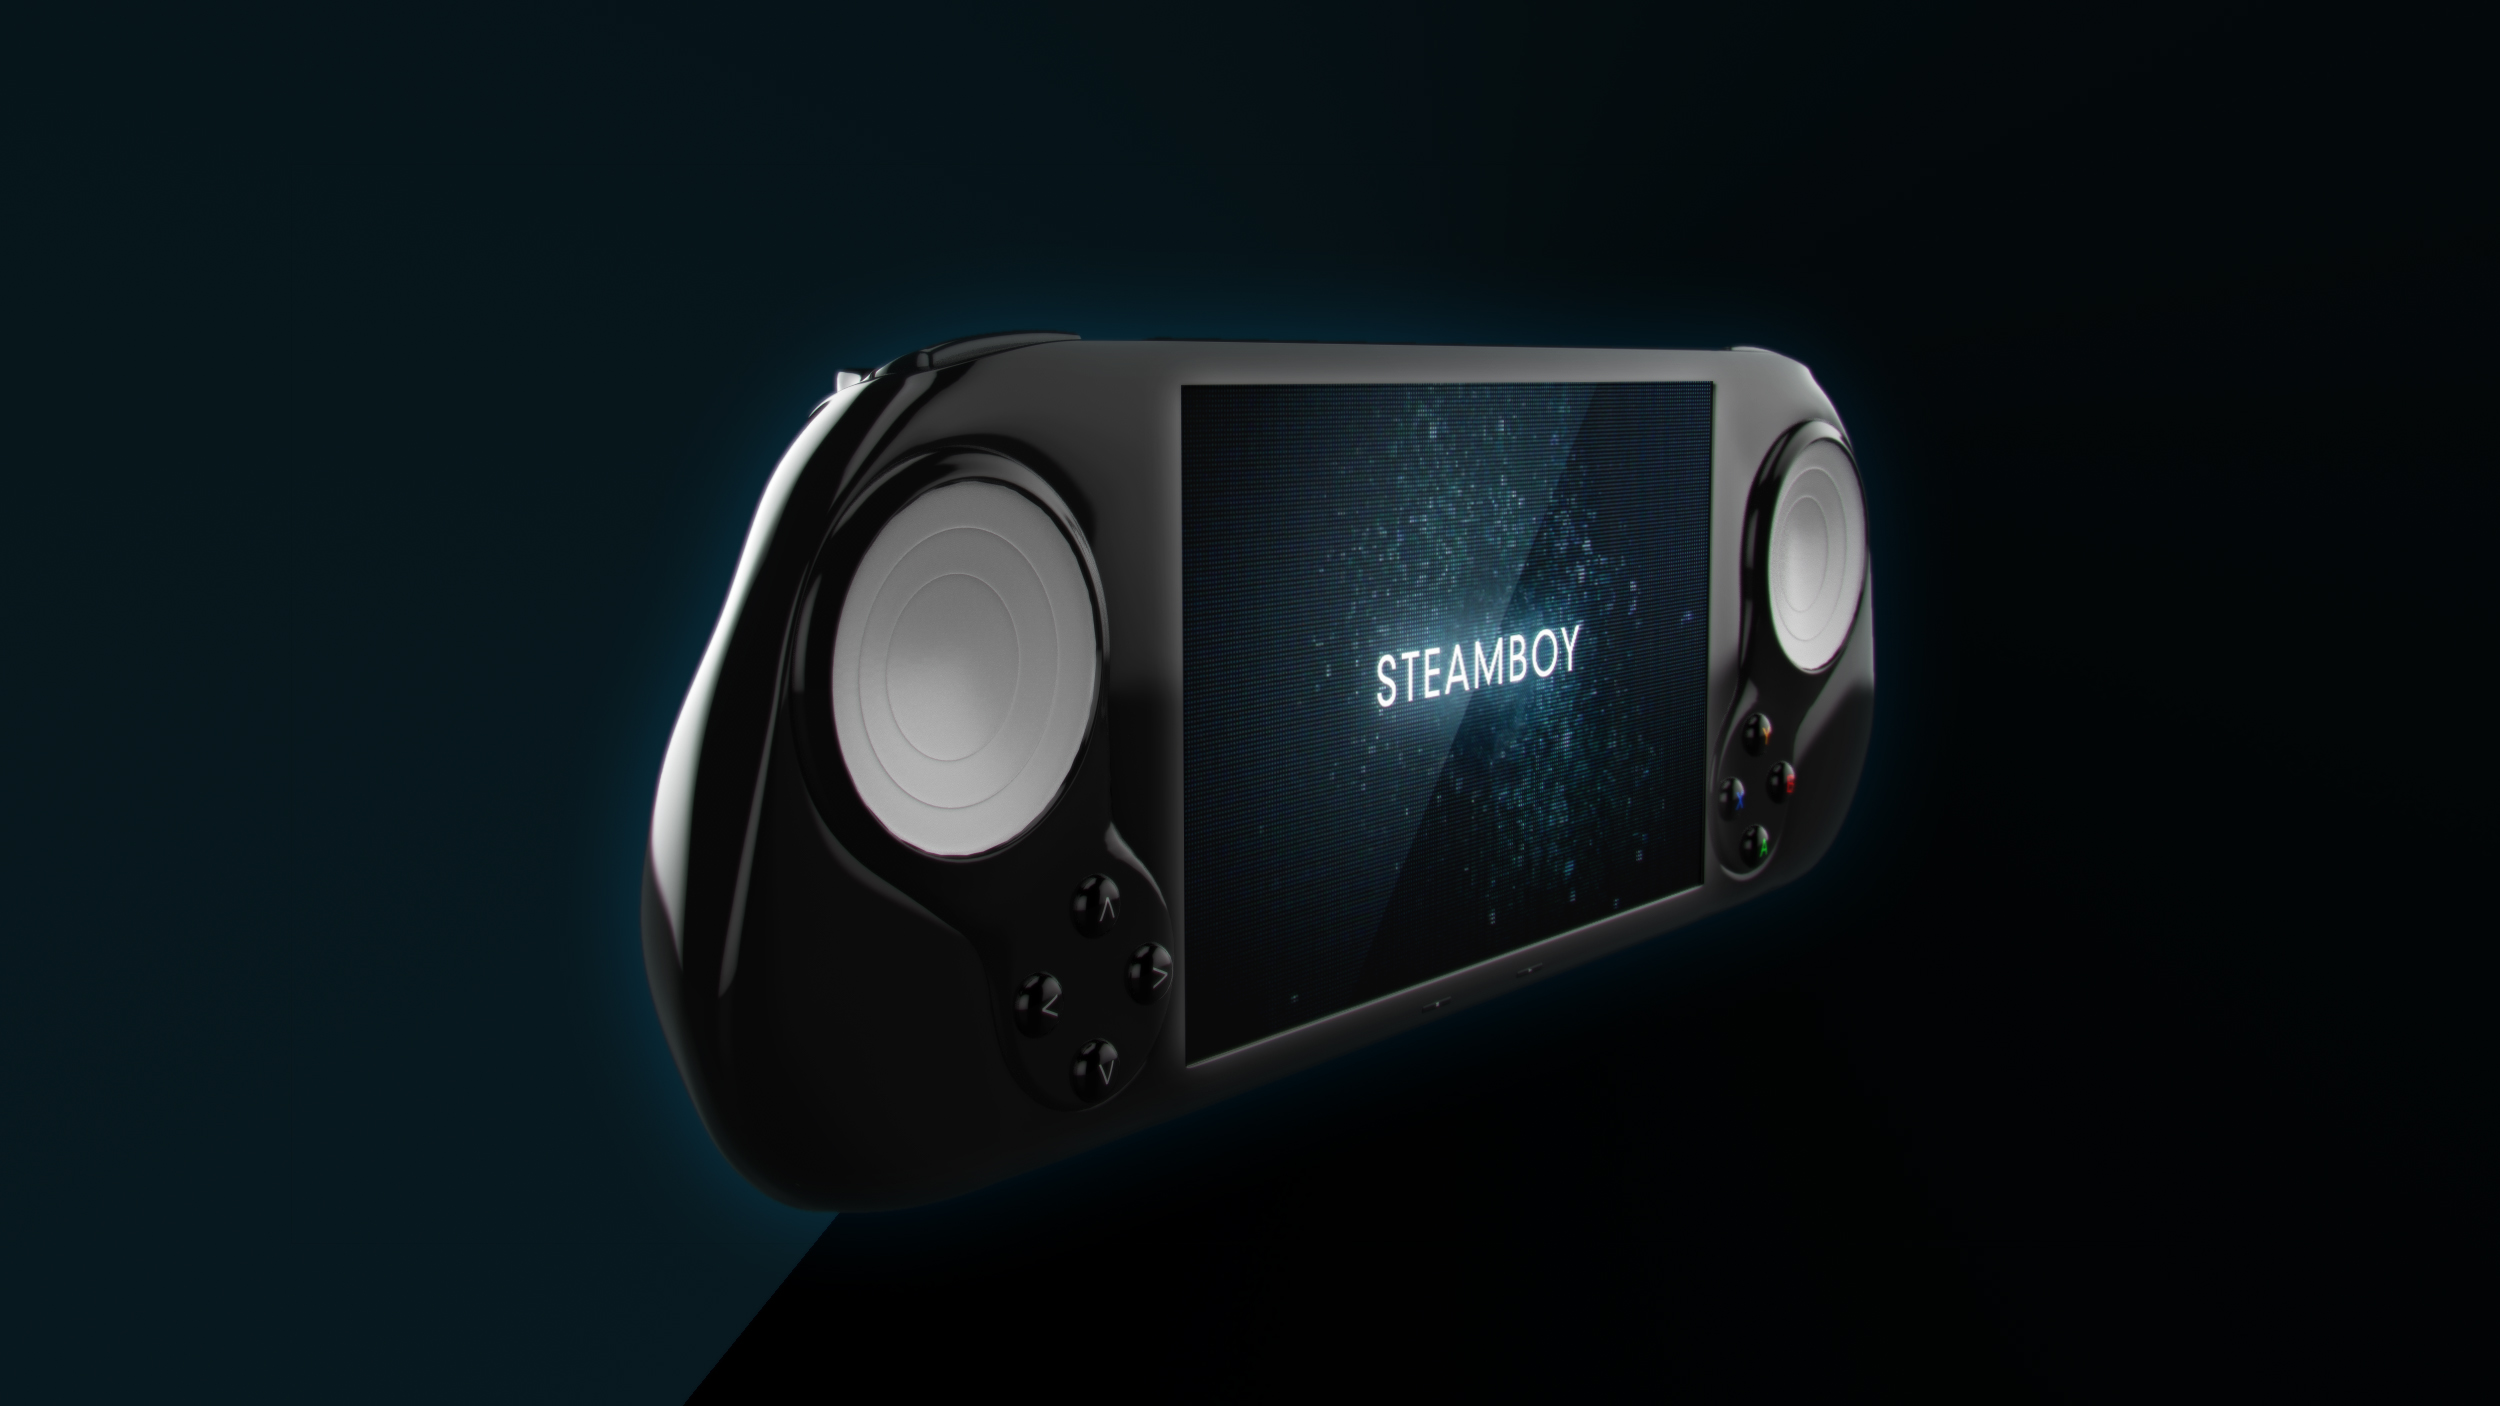 SteamBoy is a handheld device that lets you play your Steam games wherever you are